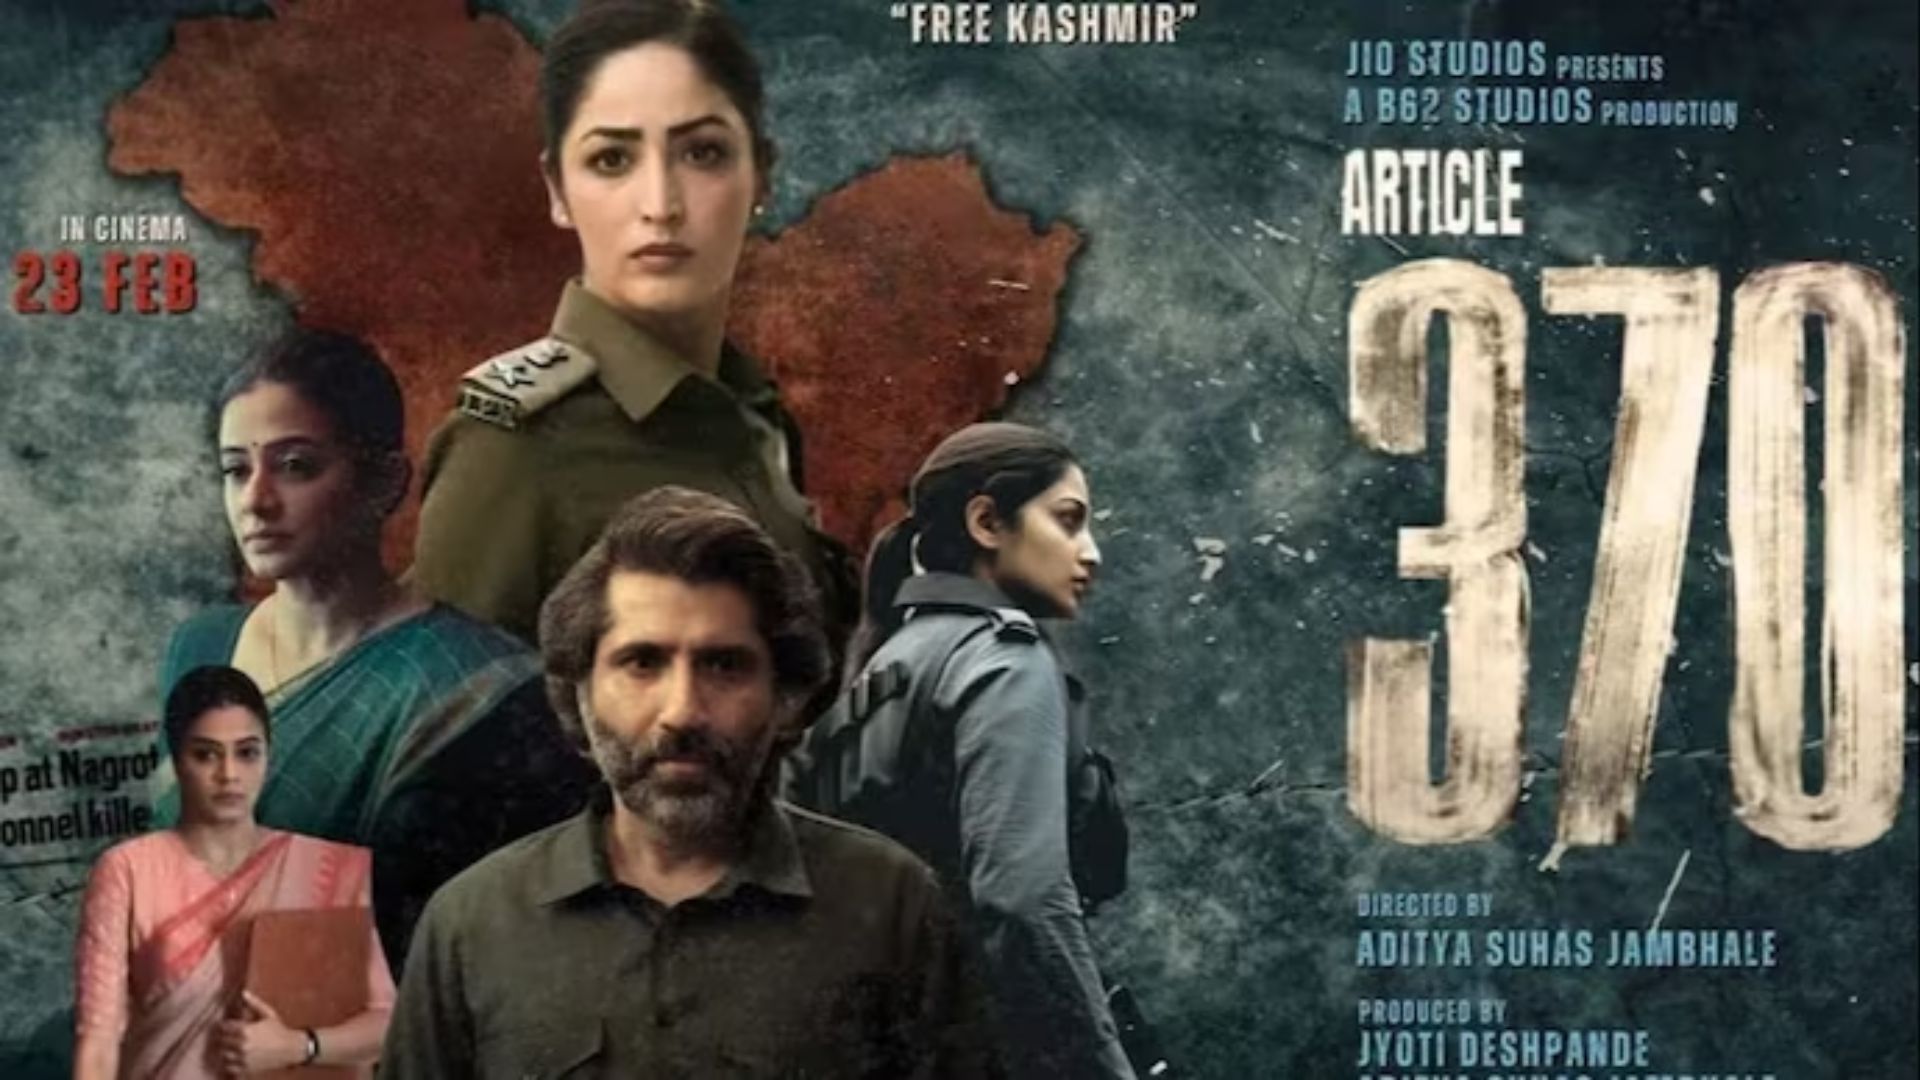 Article 370 Box Office Collection Day 1: Yami Gautam Film Off To Good Start